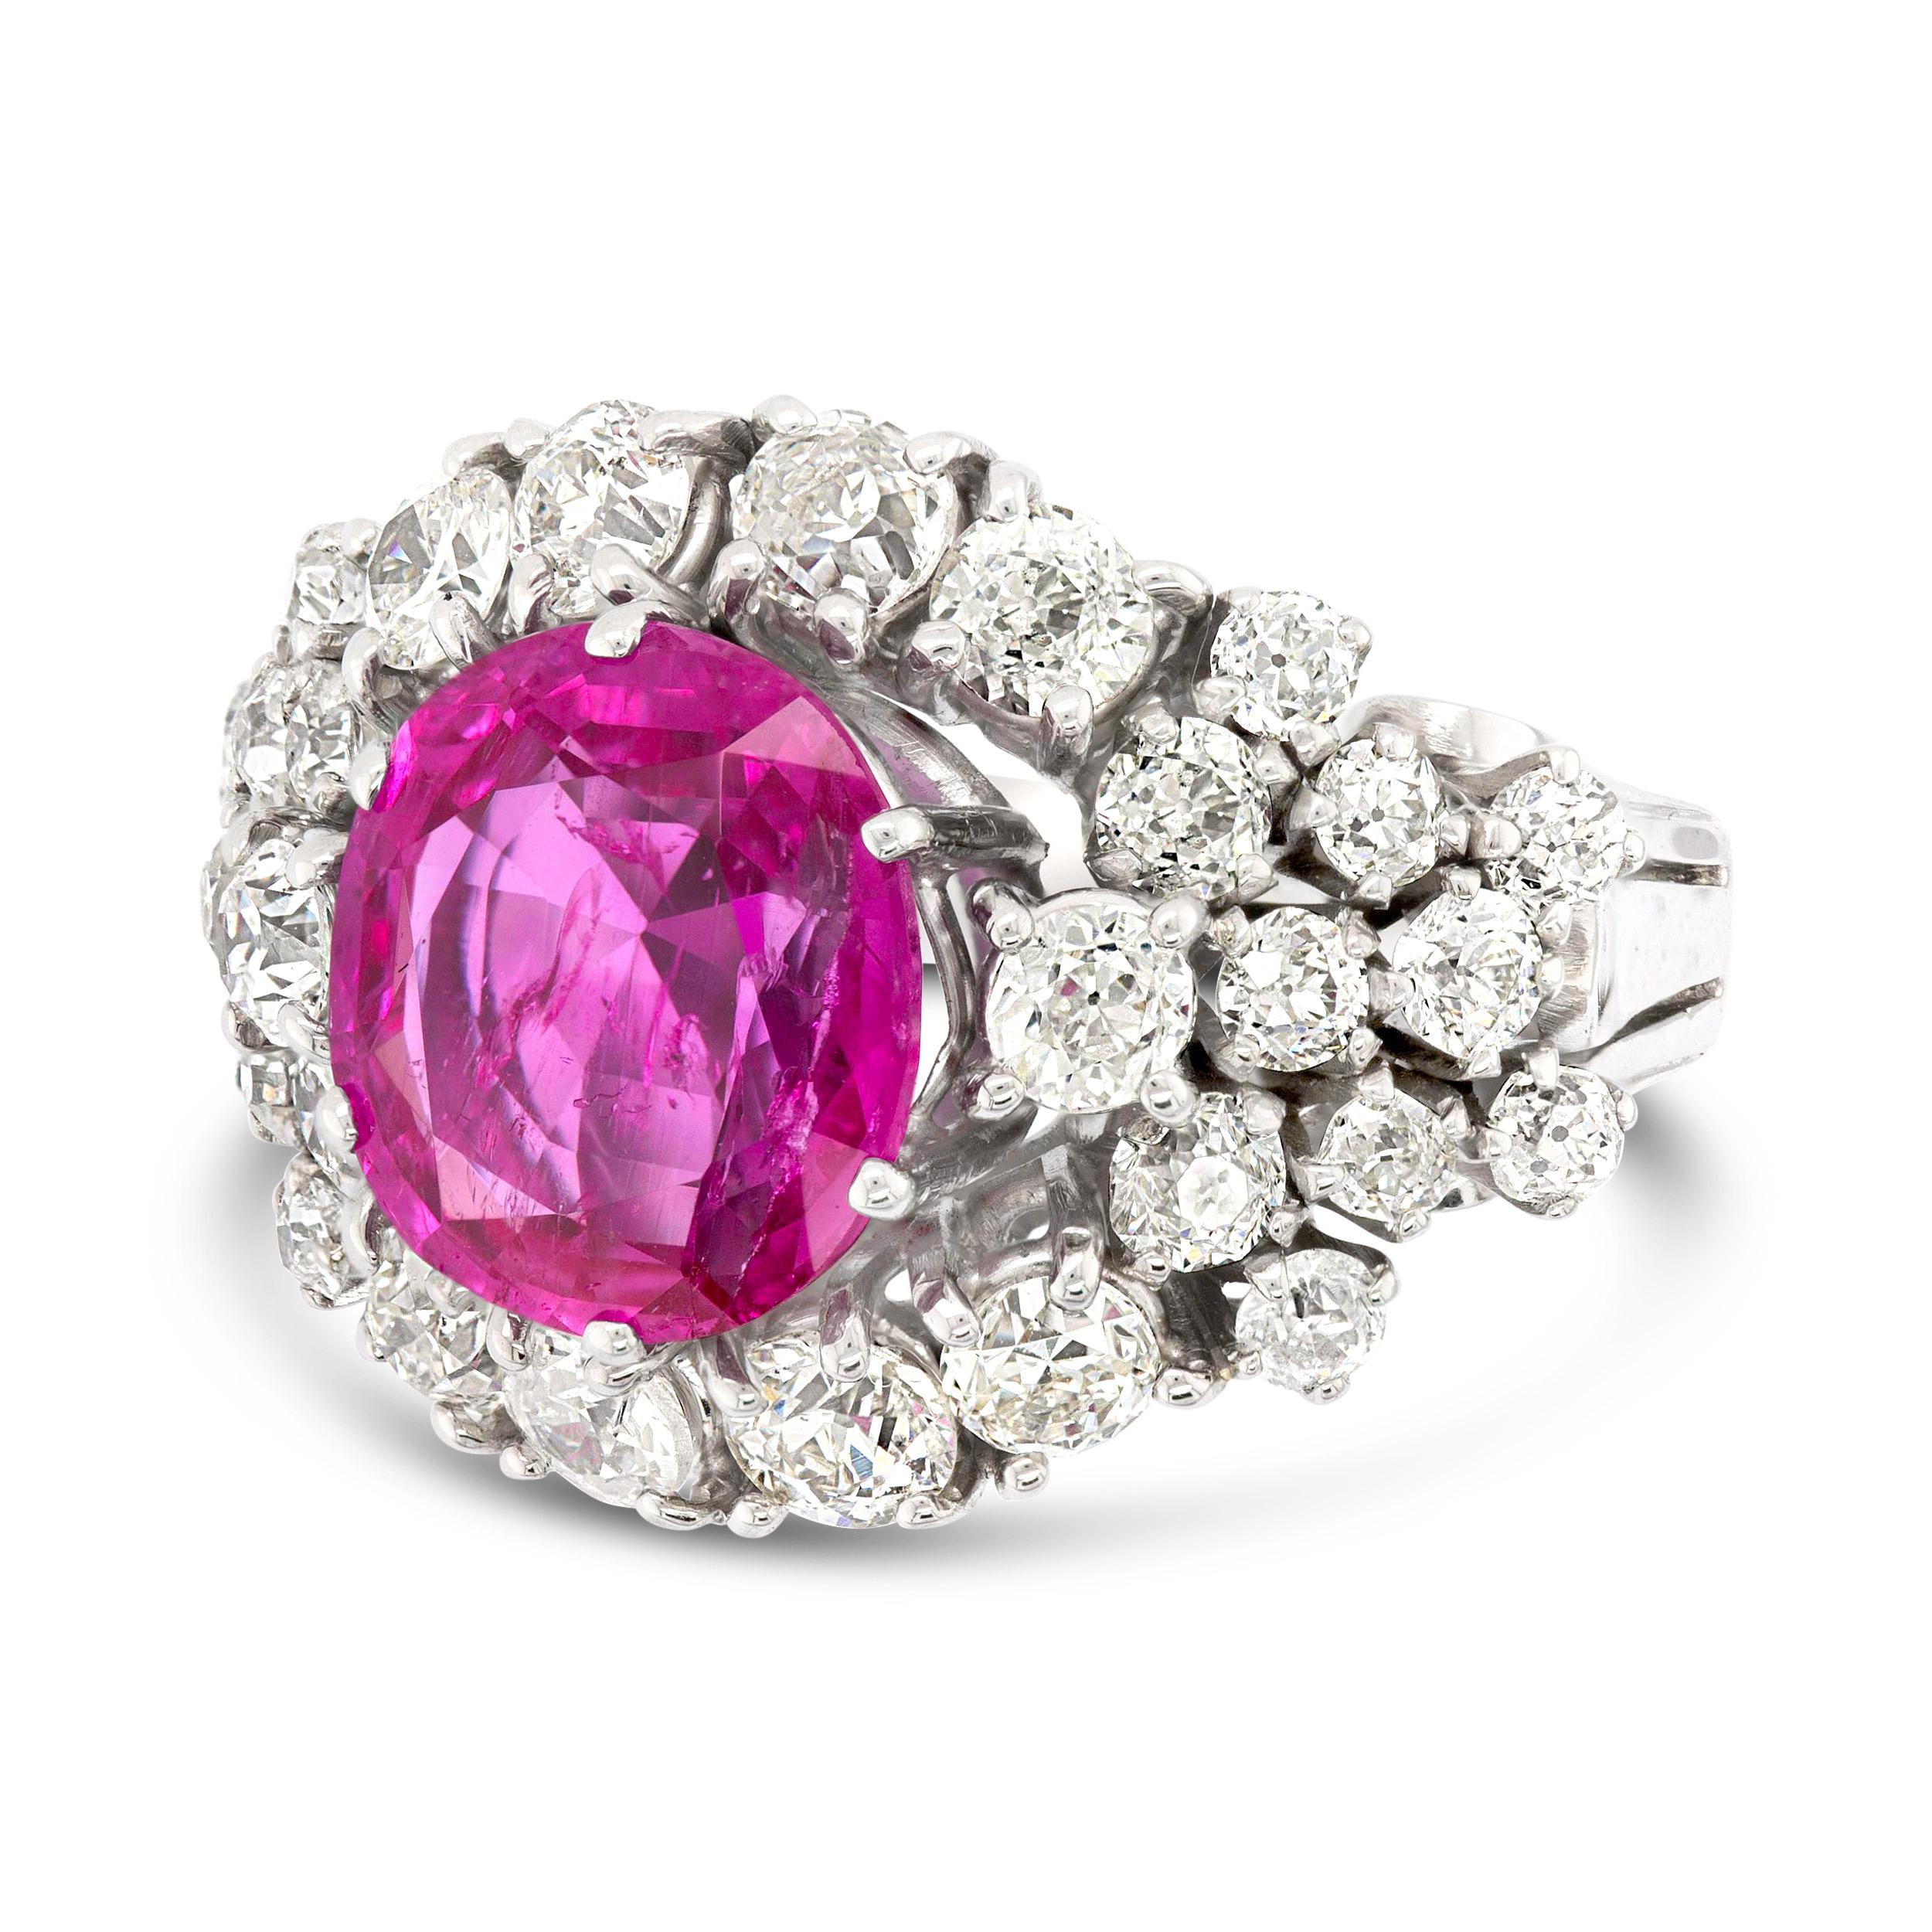 Barbie girl in a diamond world. Graded by AGL, this 4.73 ct. Burma Ruby has the most incredible hue and exhibits the Barbie moment we have all been waiting for. The mixed round diamond stones combined with the ruby create a beautiful contrast making